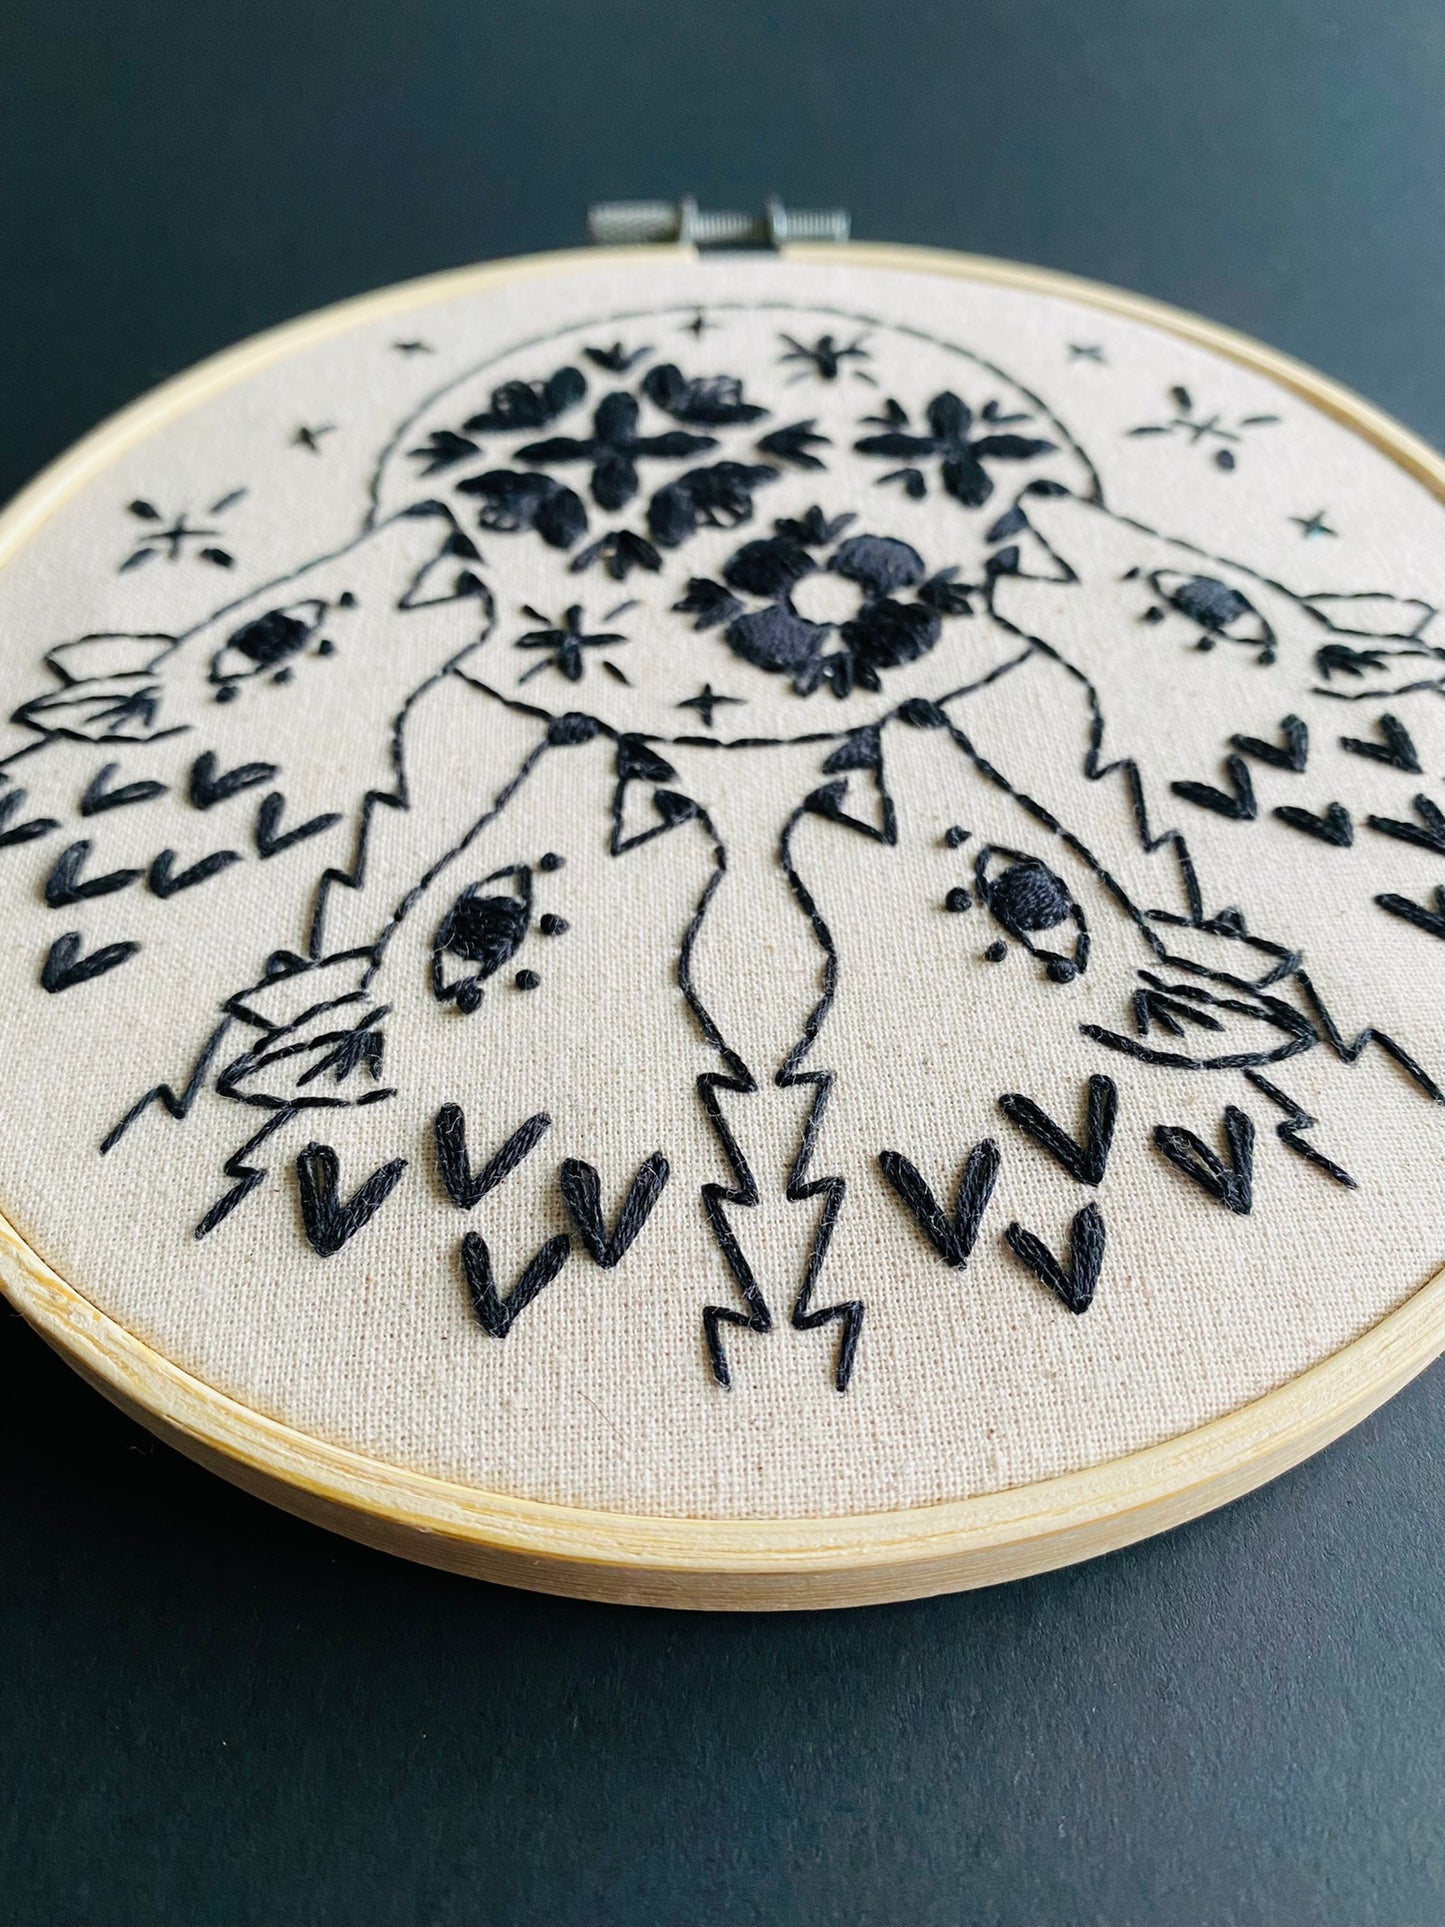 Folk Wolves Embroidery PDF Download - English and French